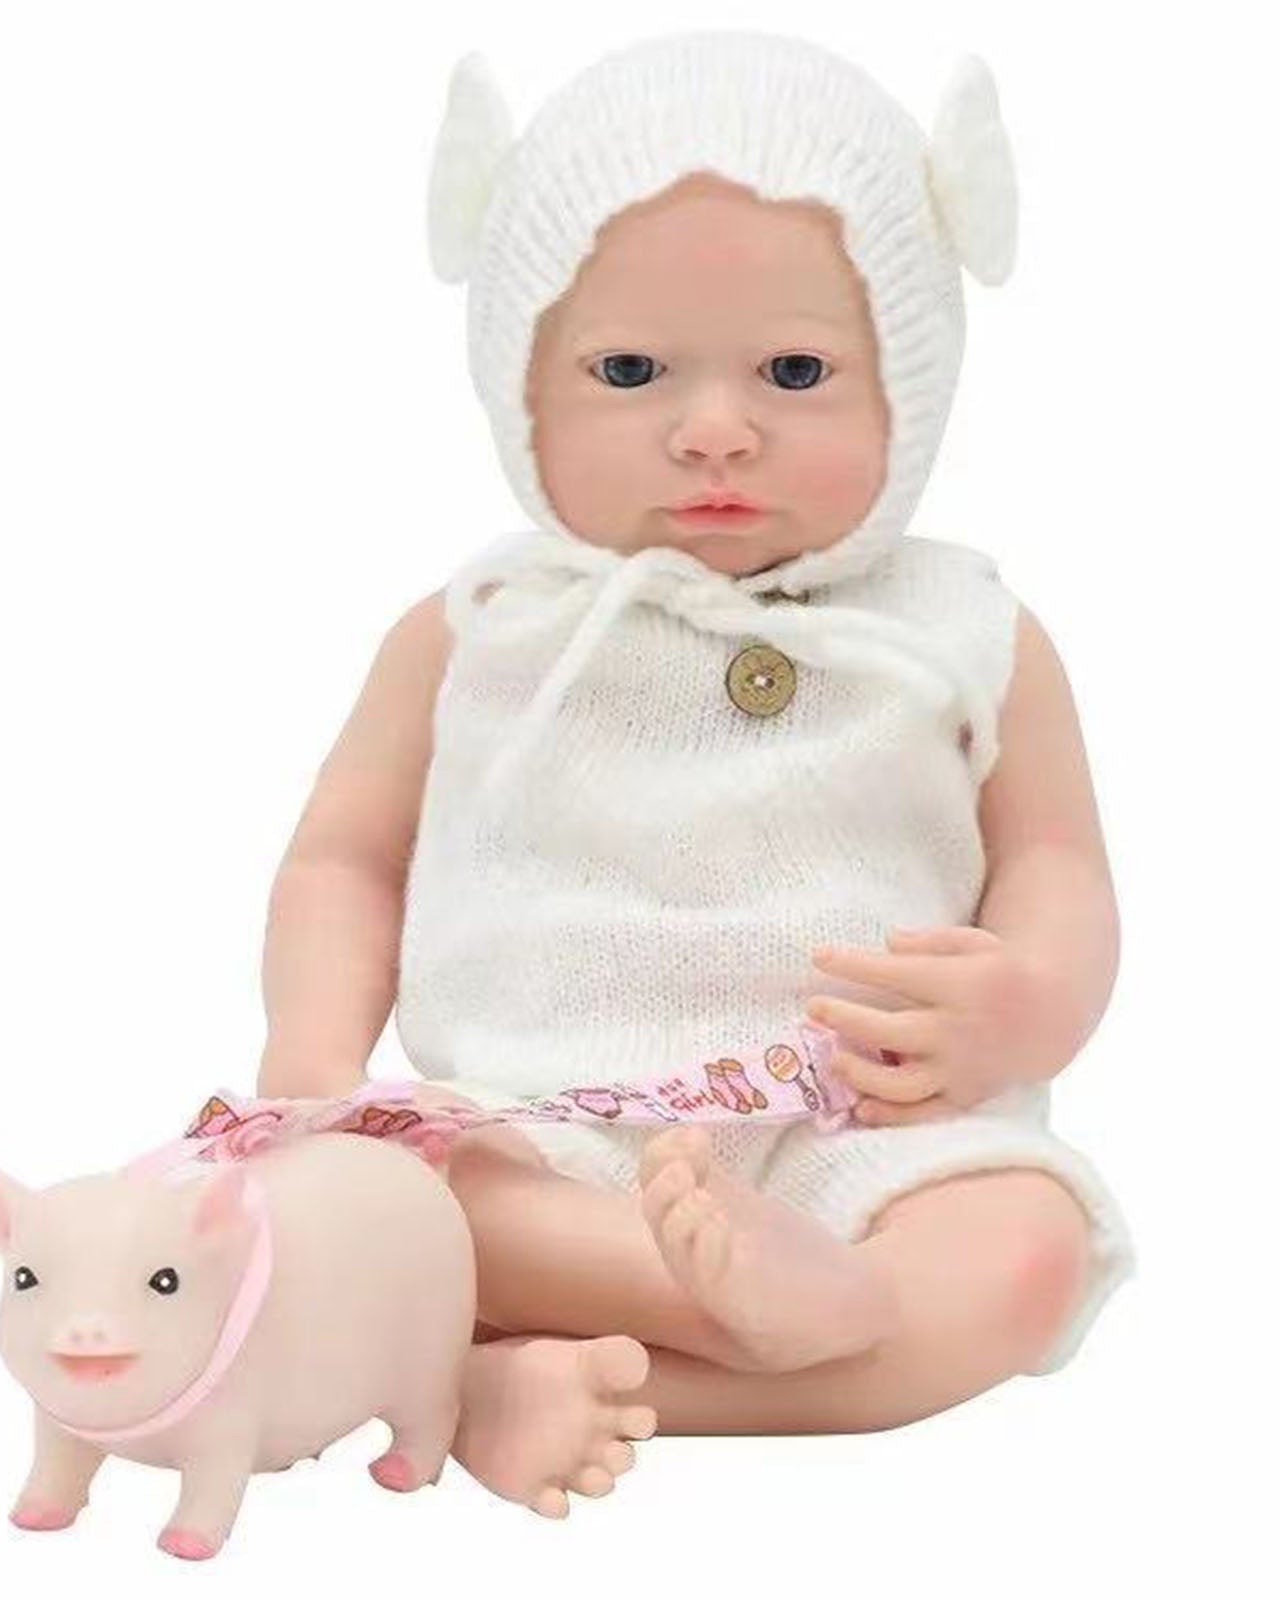 Amelia- 18" Full Silicone Reborn Baby Dolls Fully Squishy Super Realistic Newborn Girl with Extremely Flexible Body